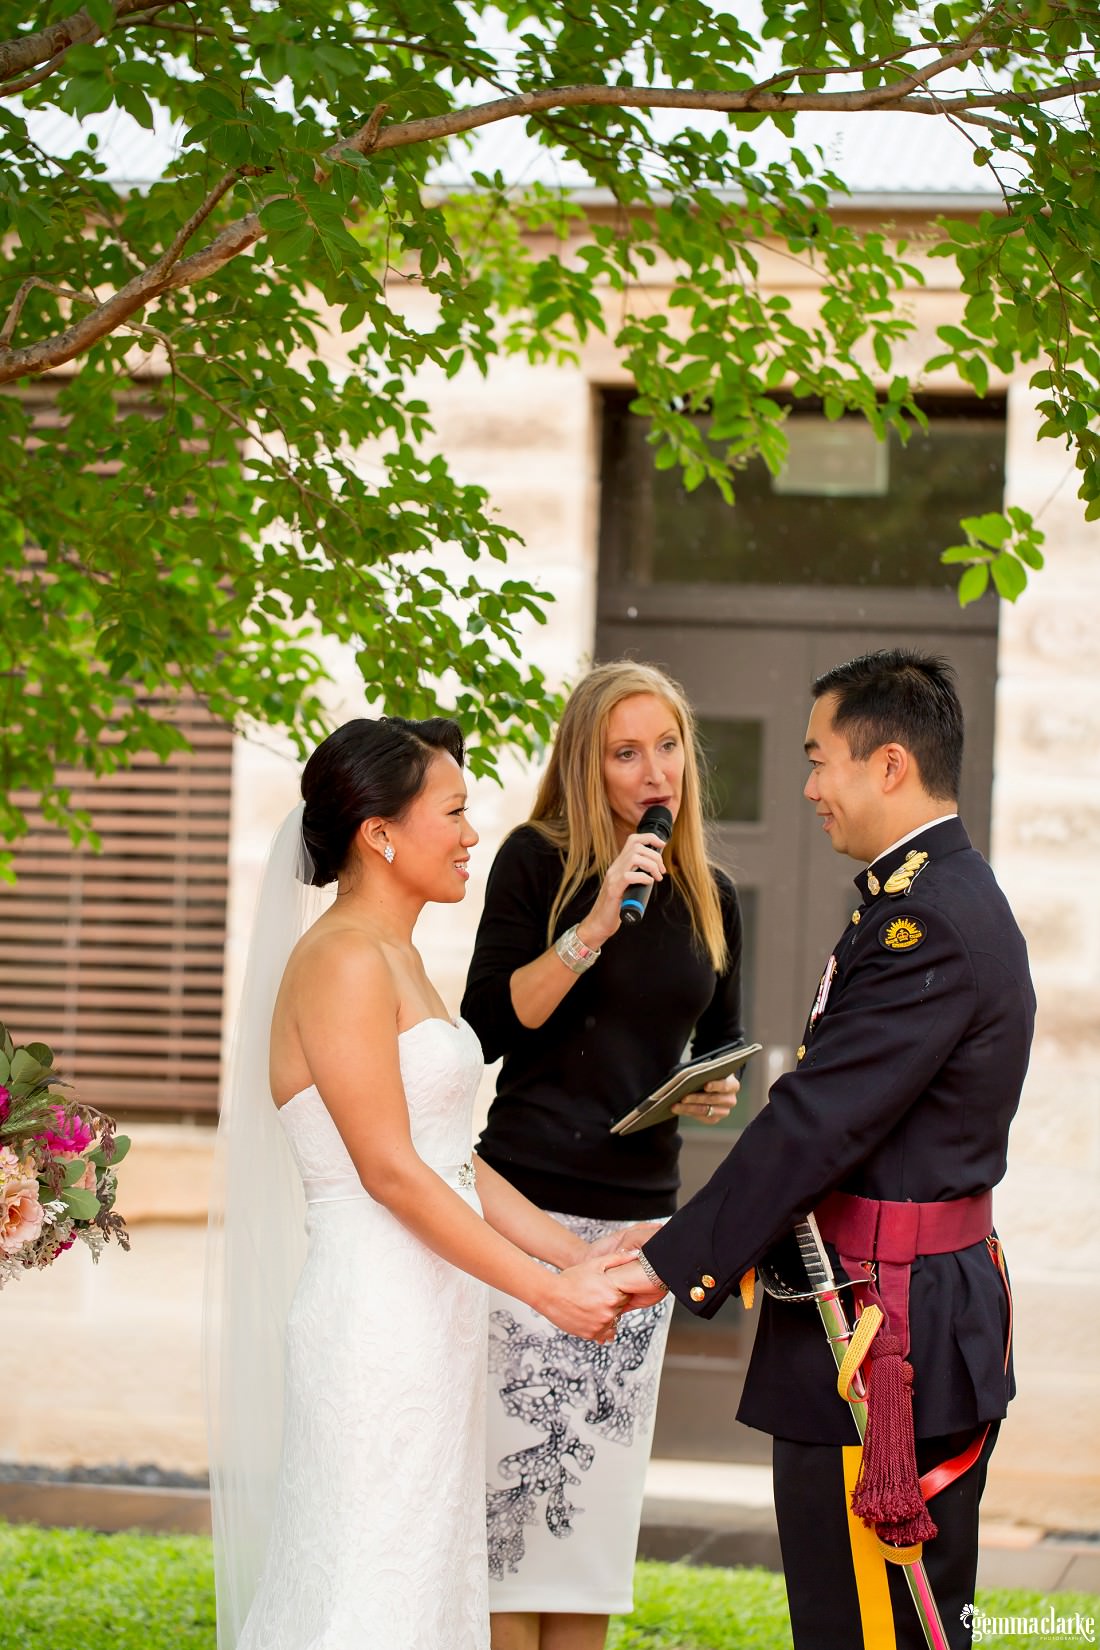 A bride and groom smile at each other and hold hands as the celebrant speaks into a microphone